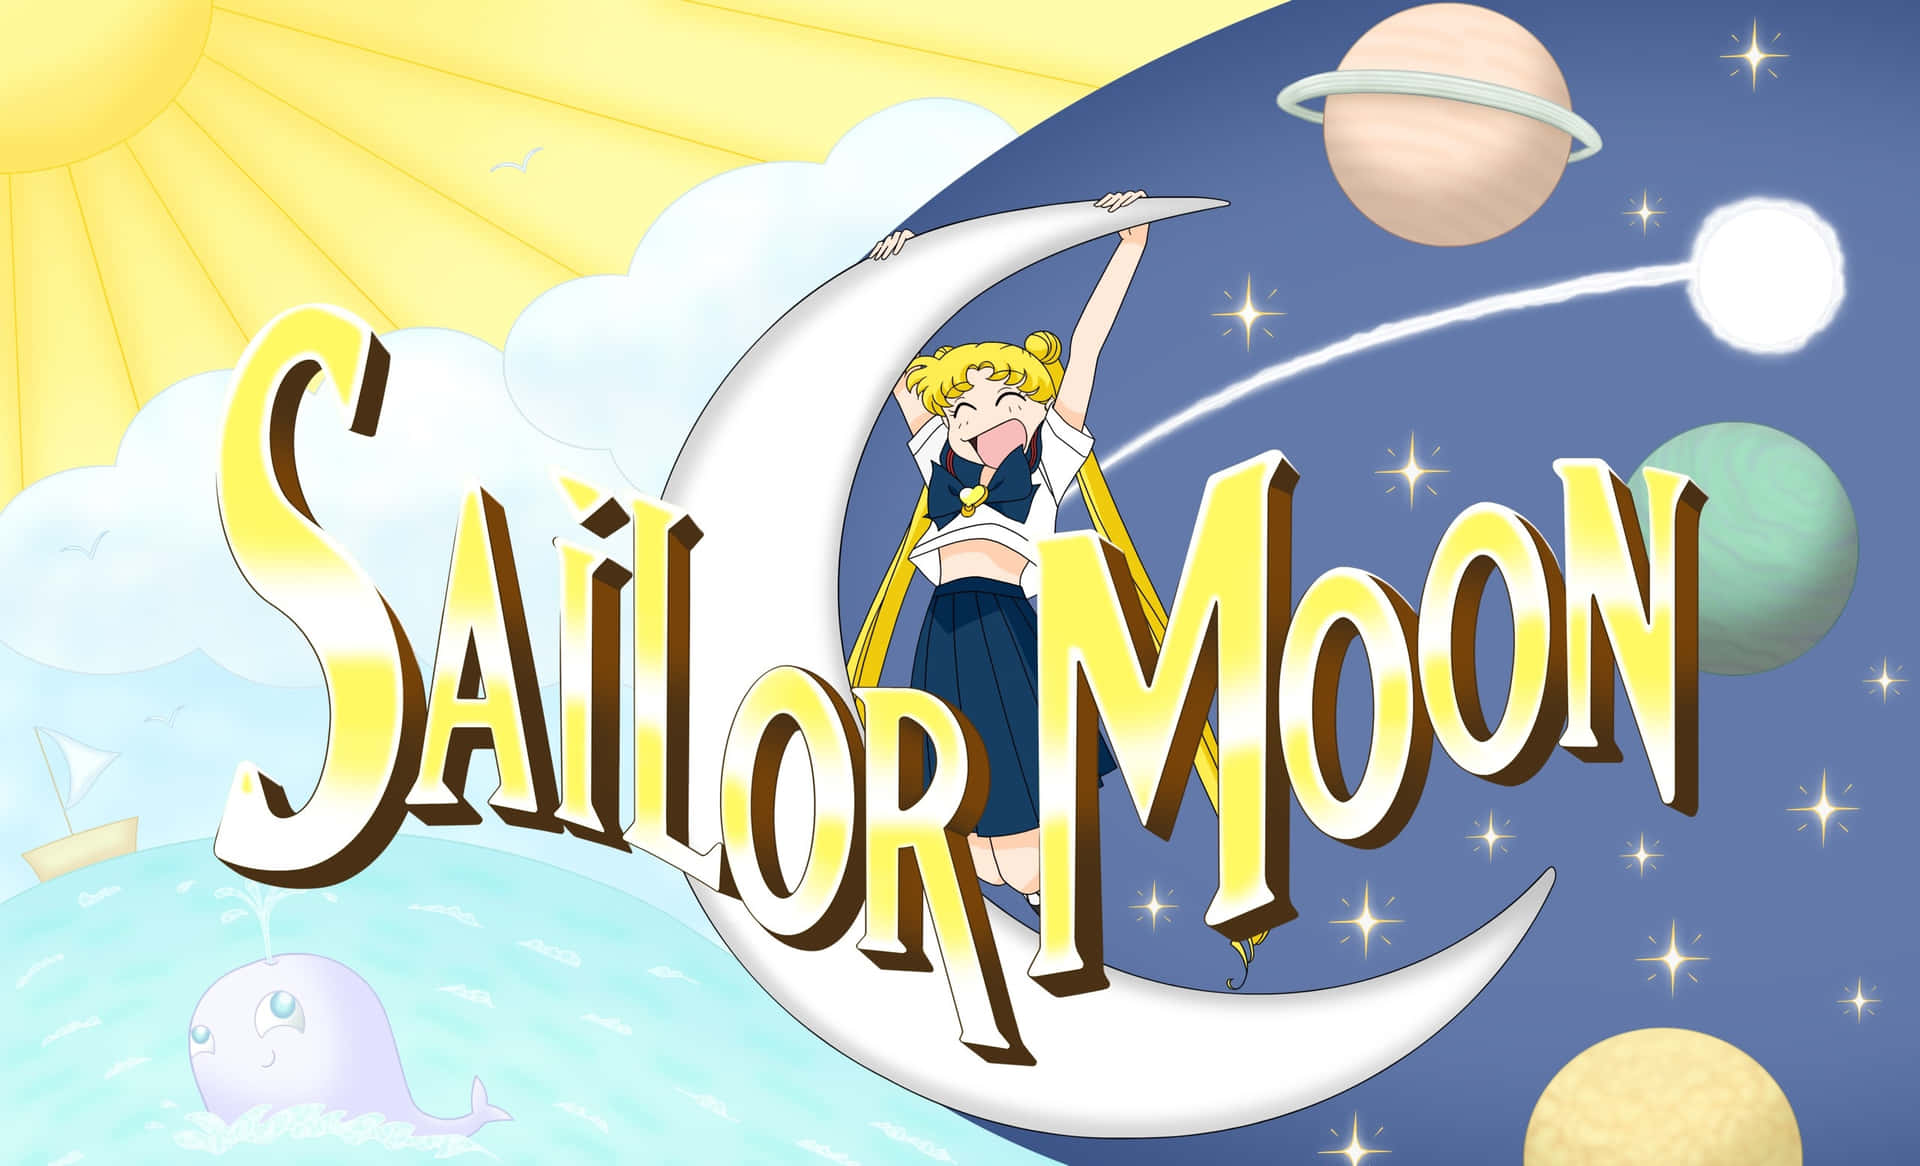 Sailor Moon - Defending Love and Justice